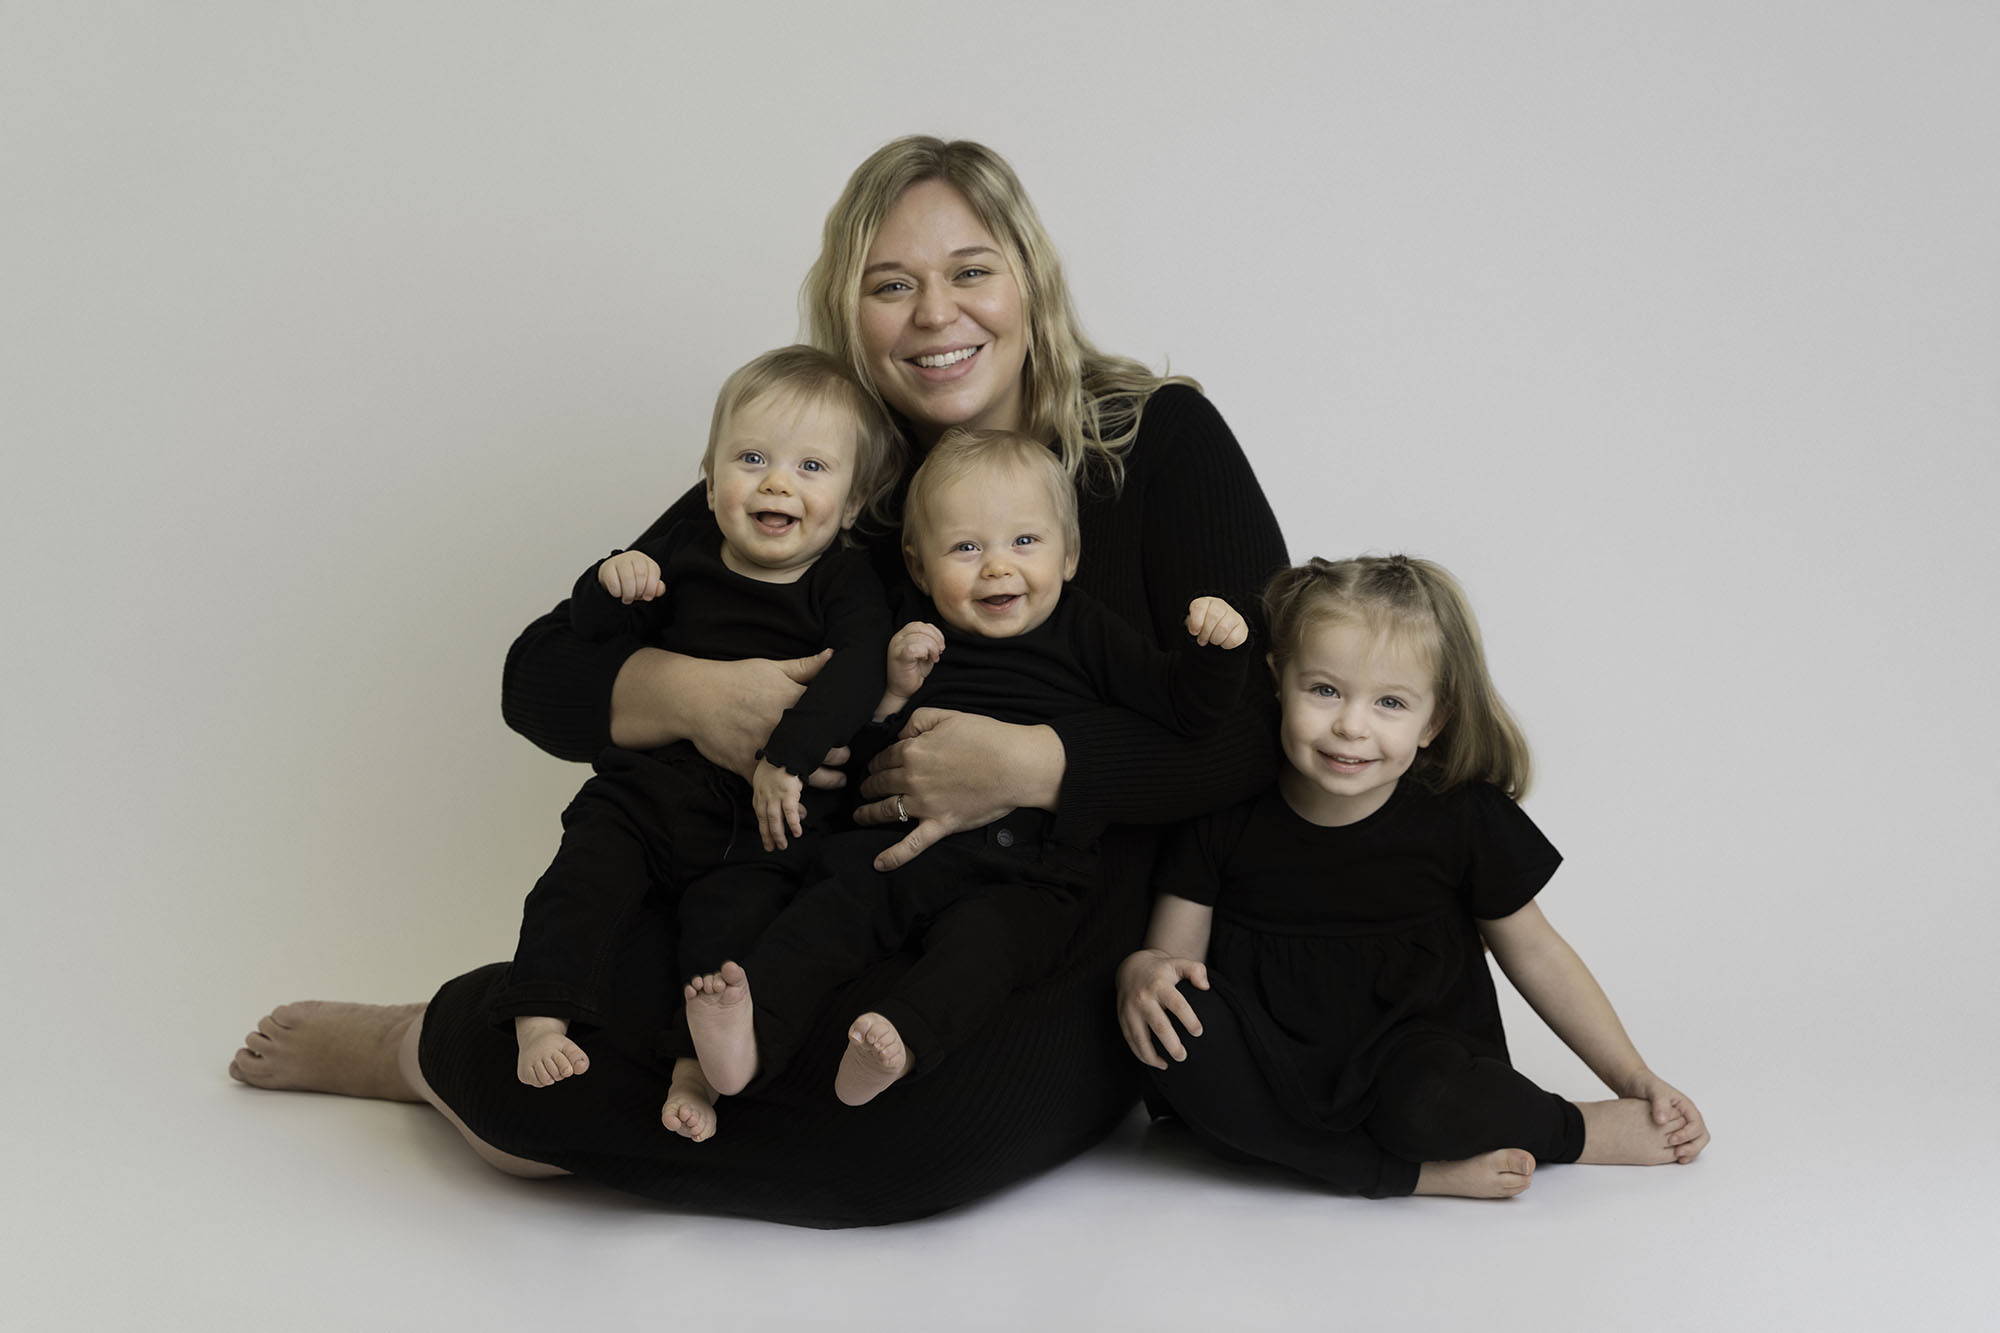 professional family portrait of mum with two sons and daughter all wearing black